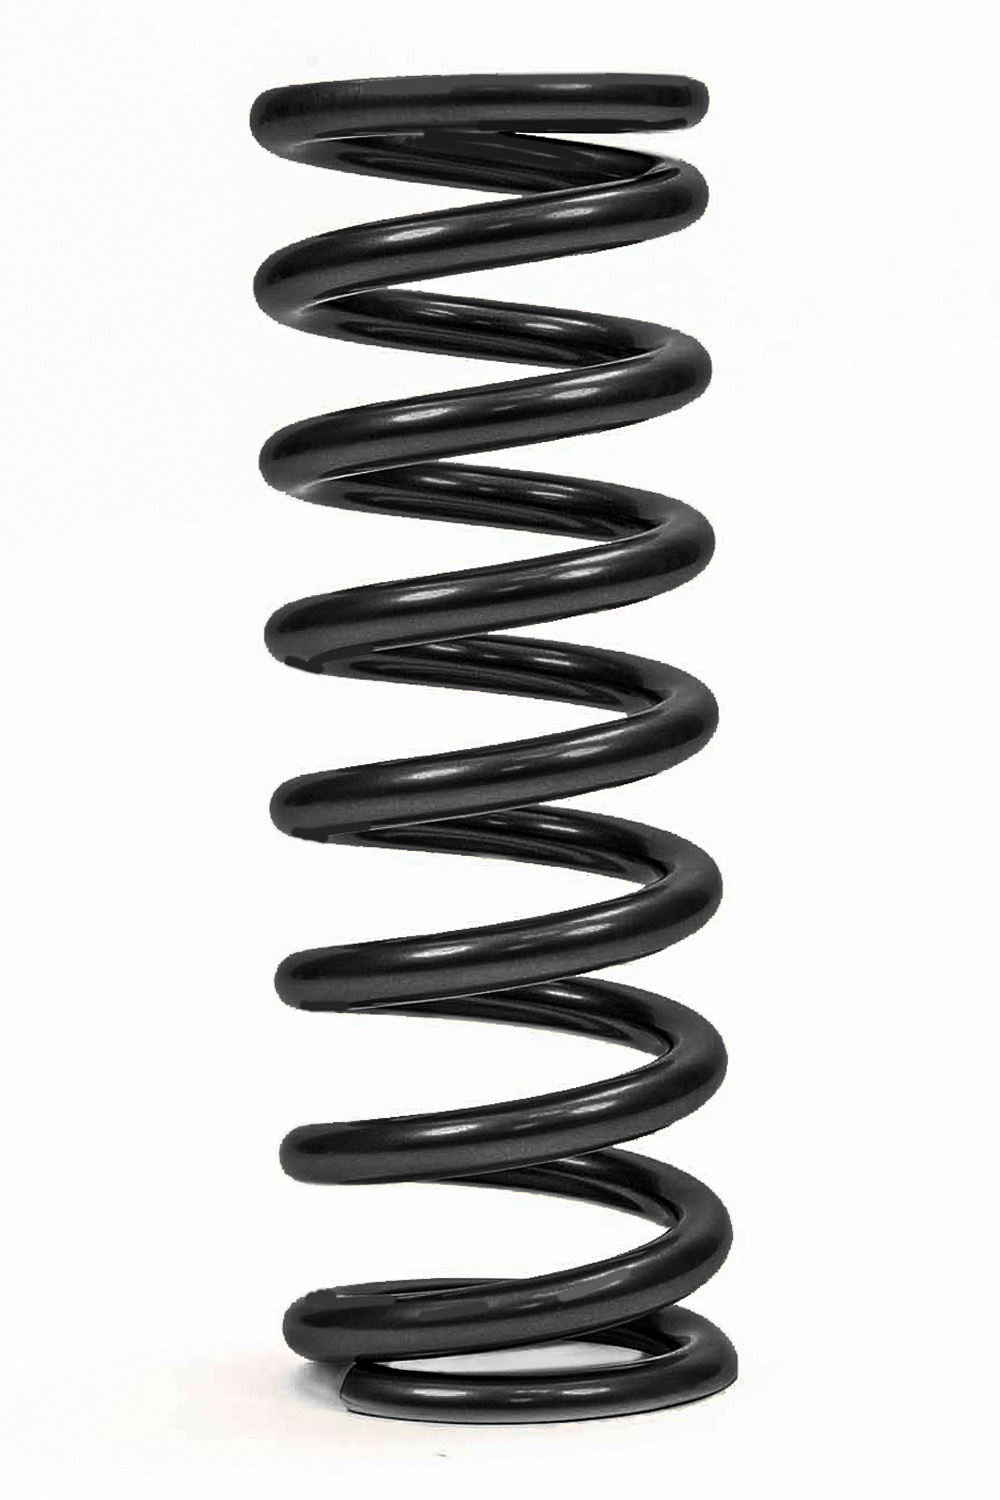 QA1 10HT125B Coil Spring, Coil-Over, 2.500 in ID, 10.000 in Length, 125 lb/in Spring Rate, Steel, Black Powder Coat, Each